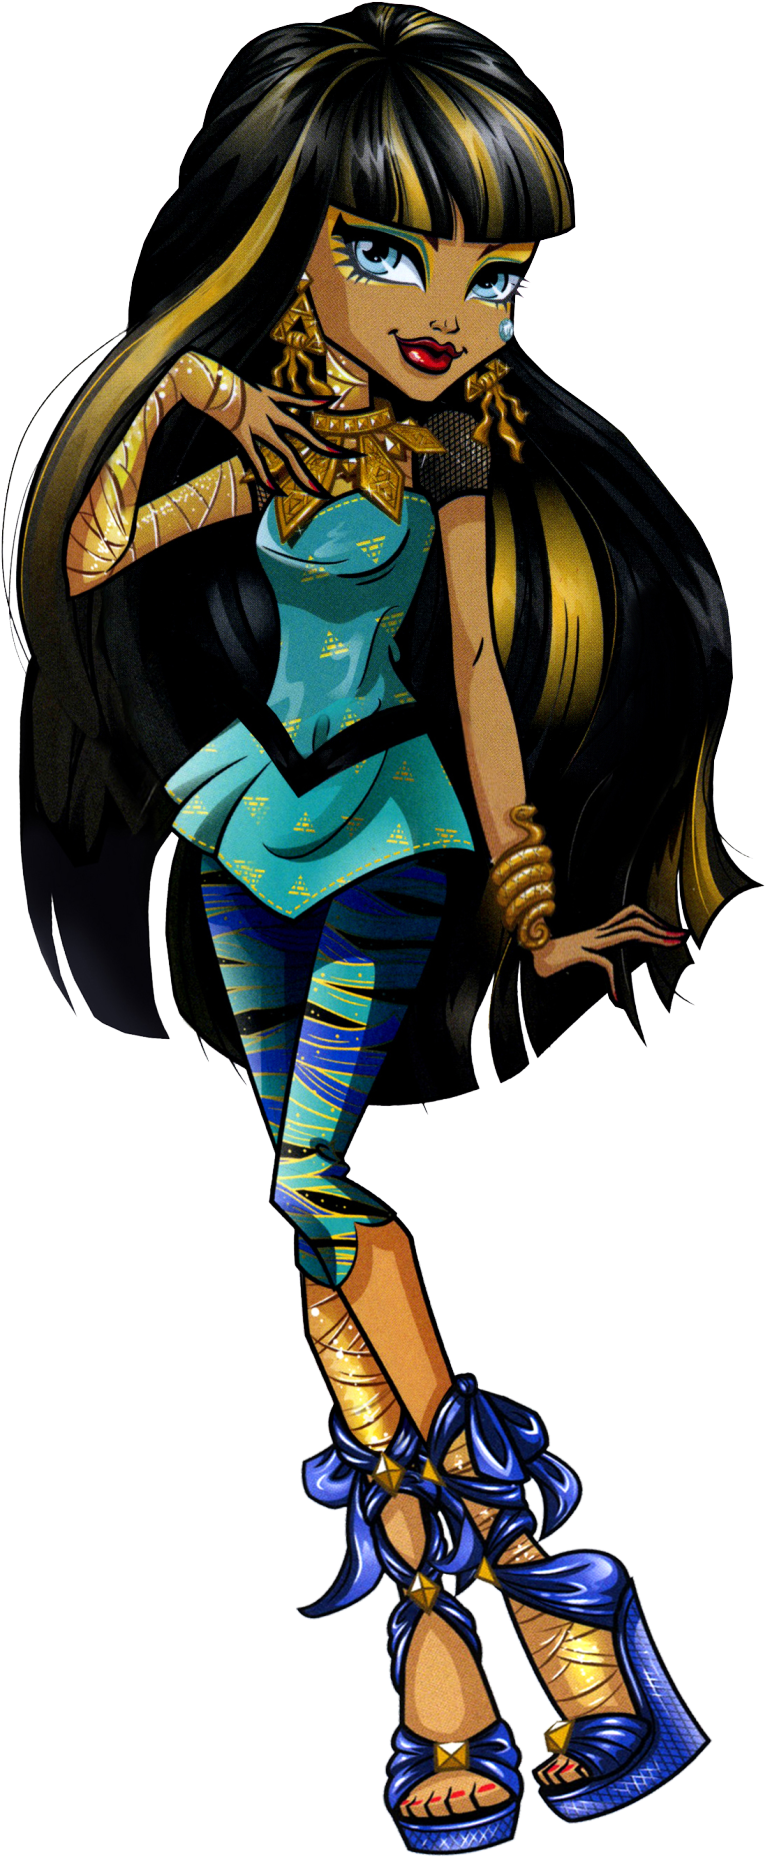 Cleo De Nile Cleo De Nile Is The Daughter Of The Mummy - Welcome Monster High Cleo De Nile Art (1279x2749)